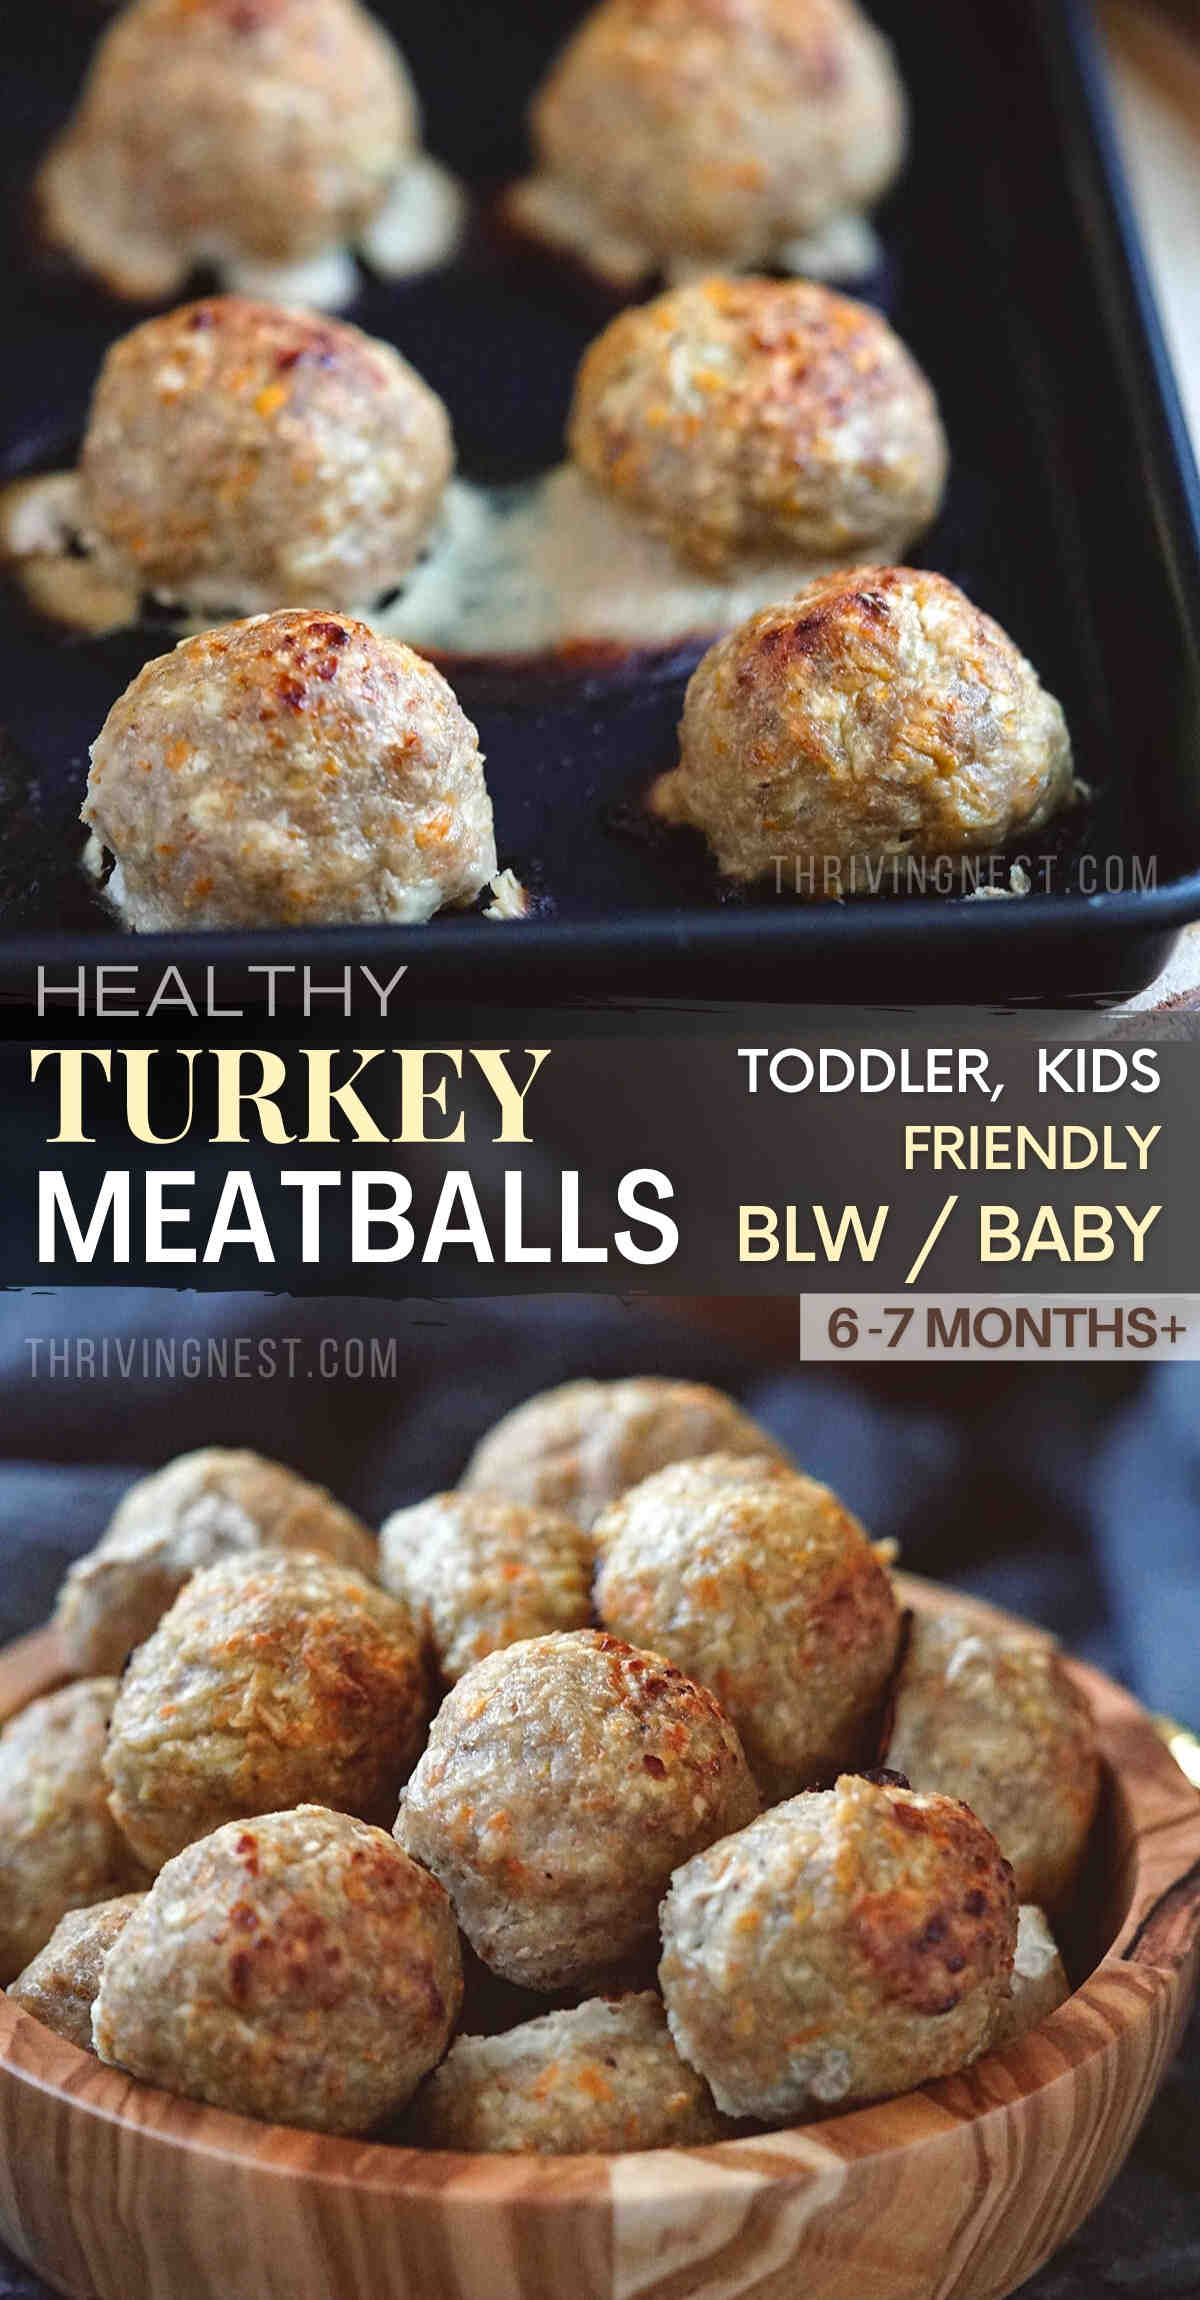 Soft turkey meatballs for baby made with ground turkey, vegetables and seasonings, no bread needed, + no egg option. These baby turkey meatballs are a great way to serve turkey for babies starting from 6 months, for baby led weaning (BLW) as finger food, including toddlers and for older kid’s school lunch box. This turkey meatball recipe is naturally gluten free and dairy free and even GAPS friendly. #babyturkeymeatballs #turkeymeatballs #blw #turkeybabyfood #babyfingerfood